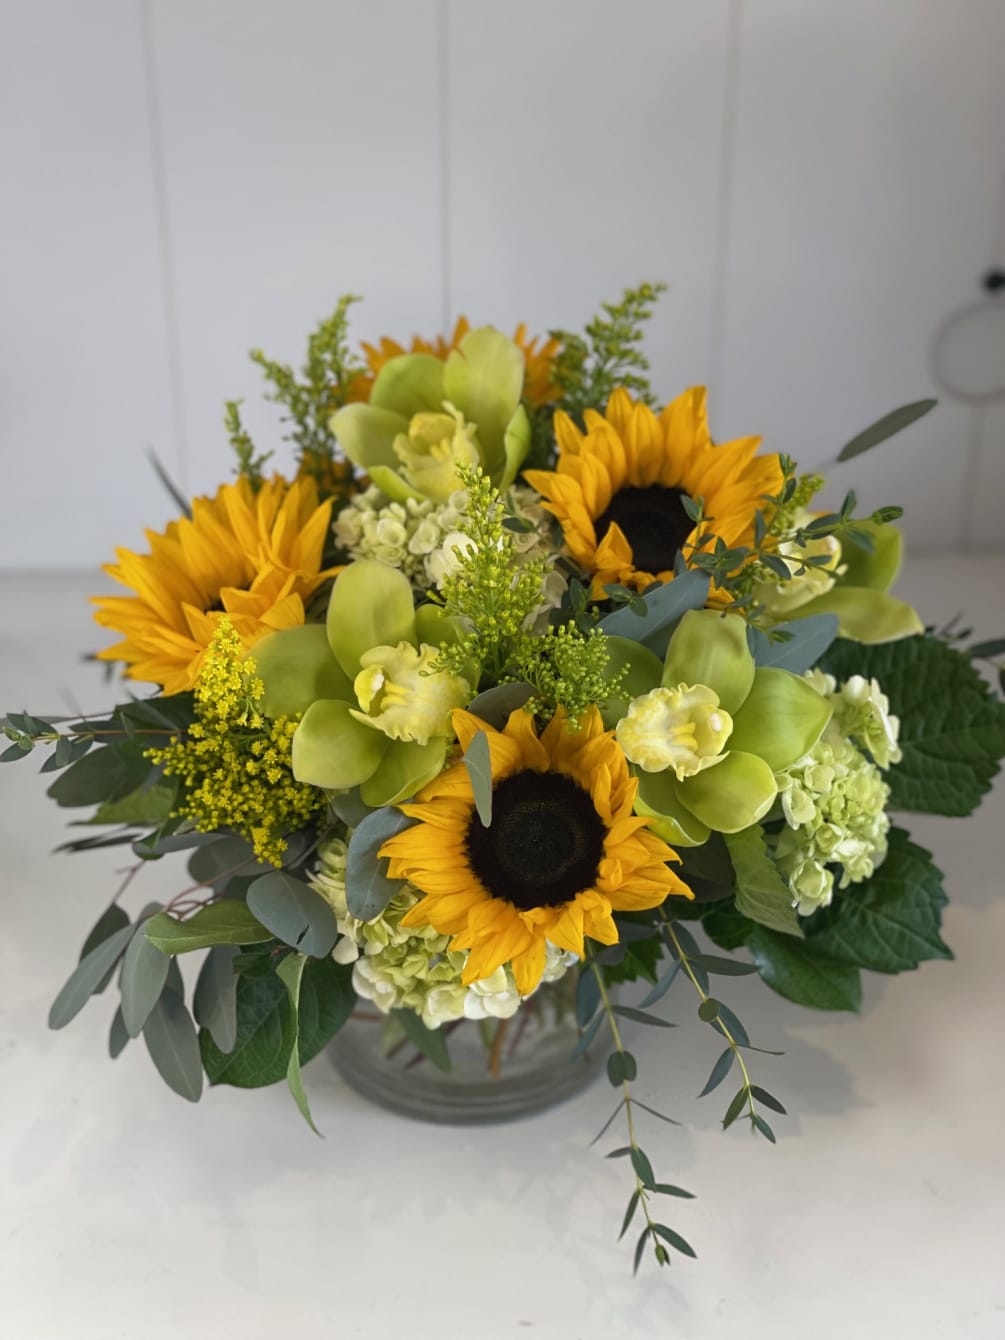 Beautiful golden sunflowers, mini green hydrangeas and cymbidium orchids with a touch